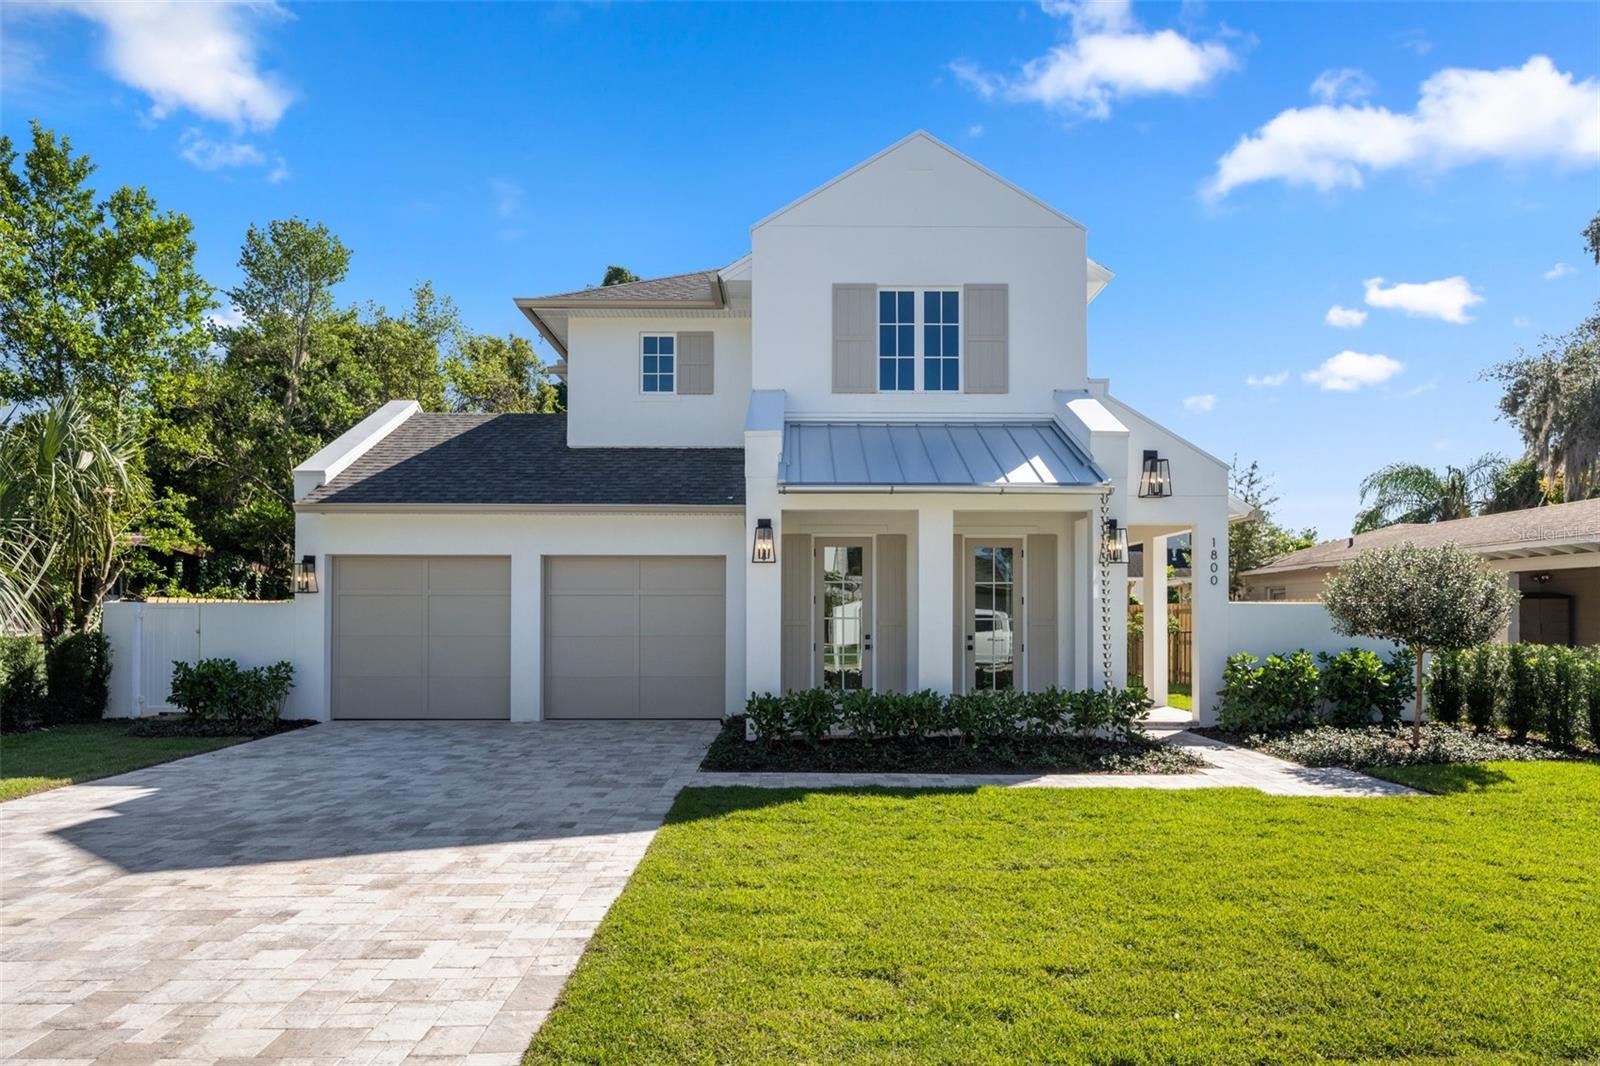 Photo one of 1800 Bryan Ave Winter Park FL 32789 | MLS O6150036